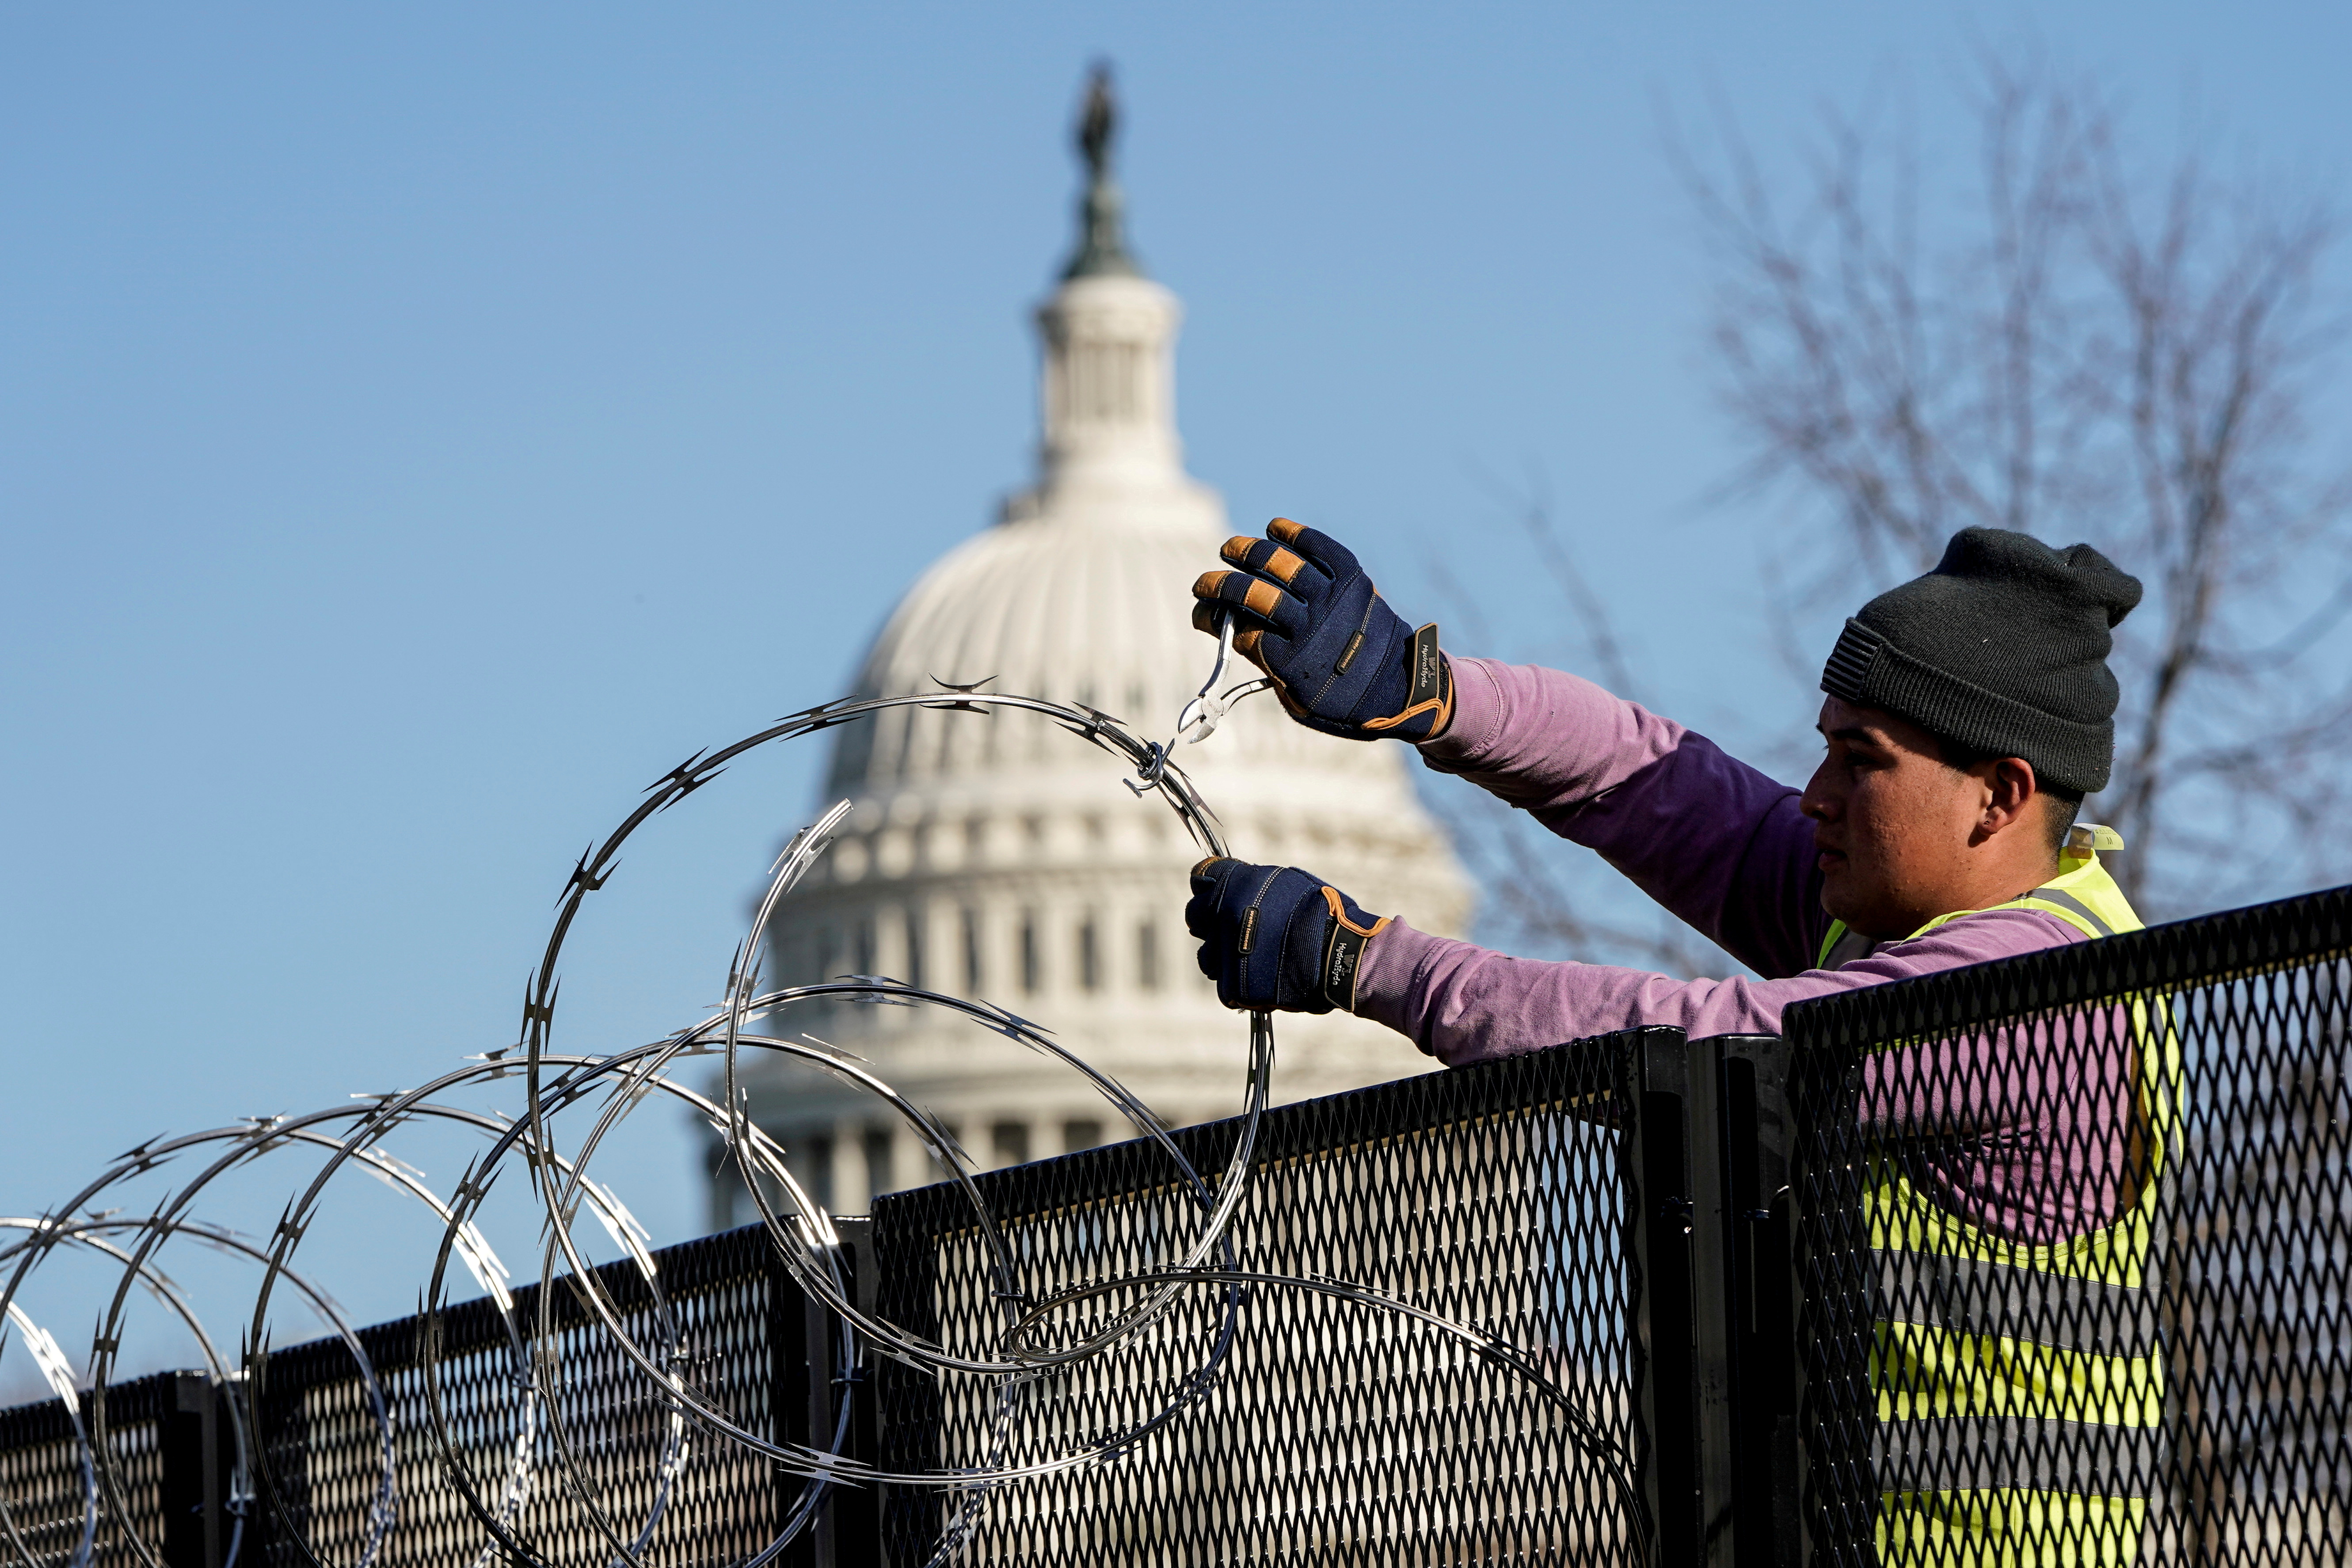 Workers remove razor wire from security fencing near the U.S. Capitol in Washington